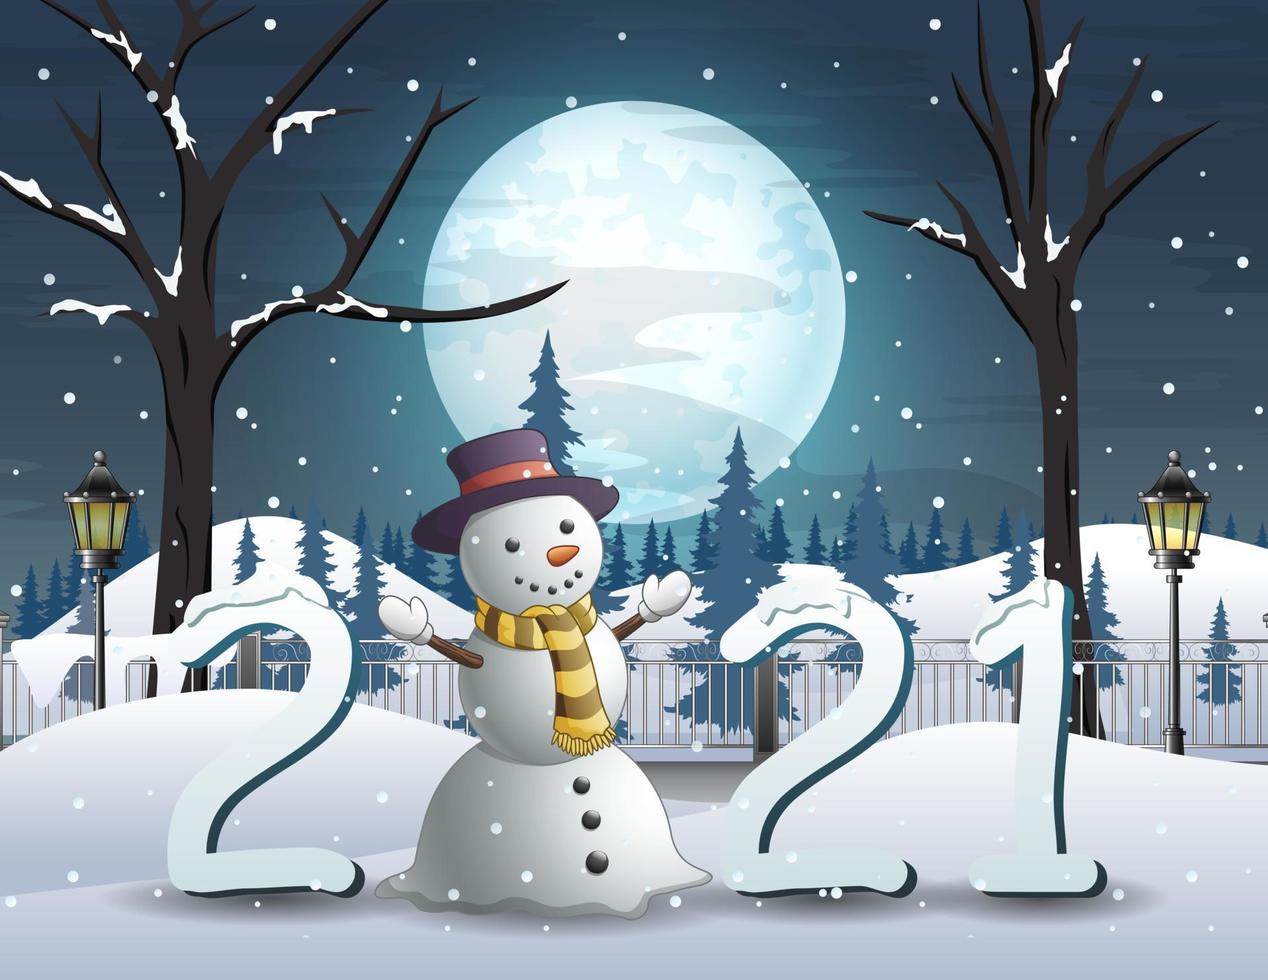 Happy New Year 2021 in winter night background vector